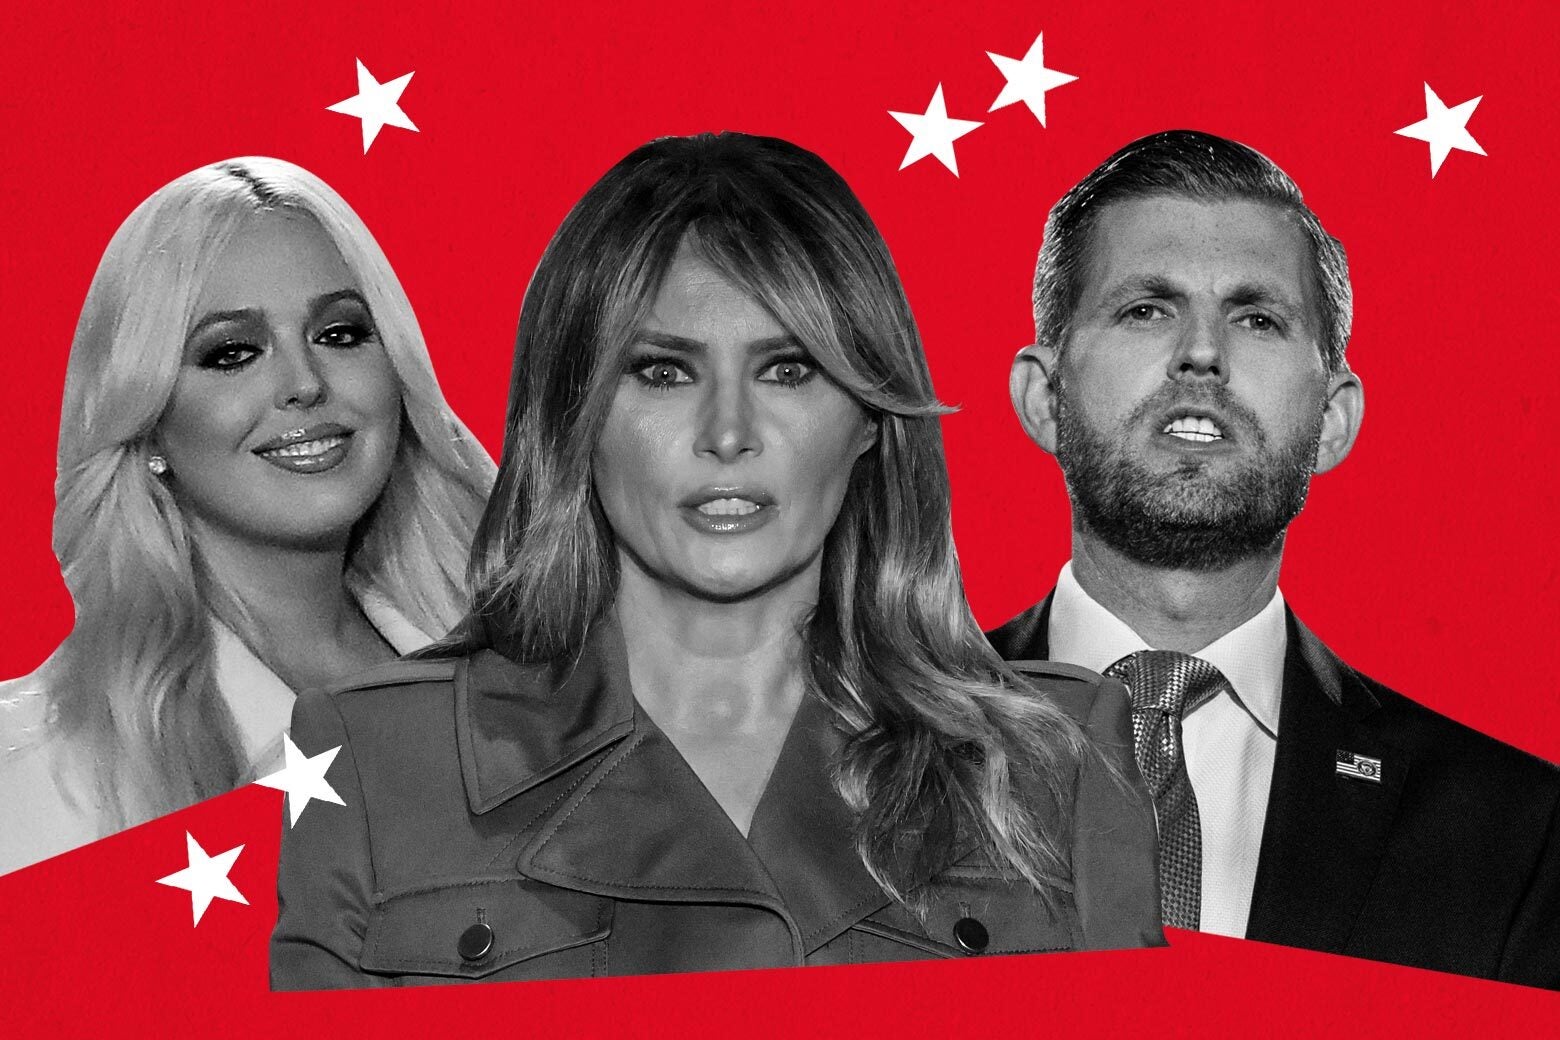 Tiffany Trump, Melania Trump, and Eric Trump on a red background.